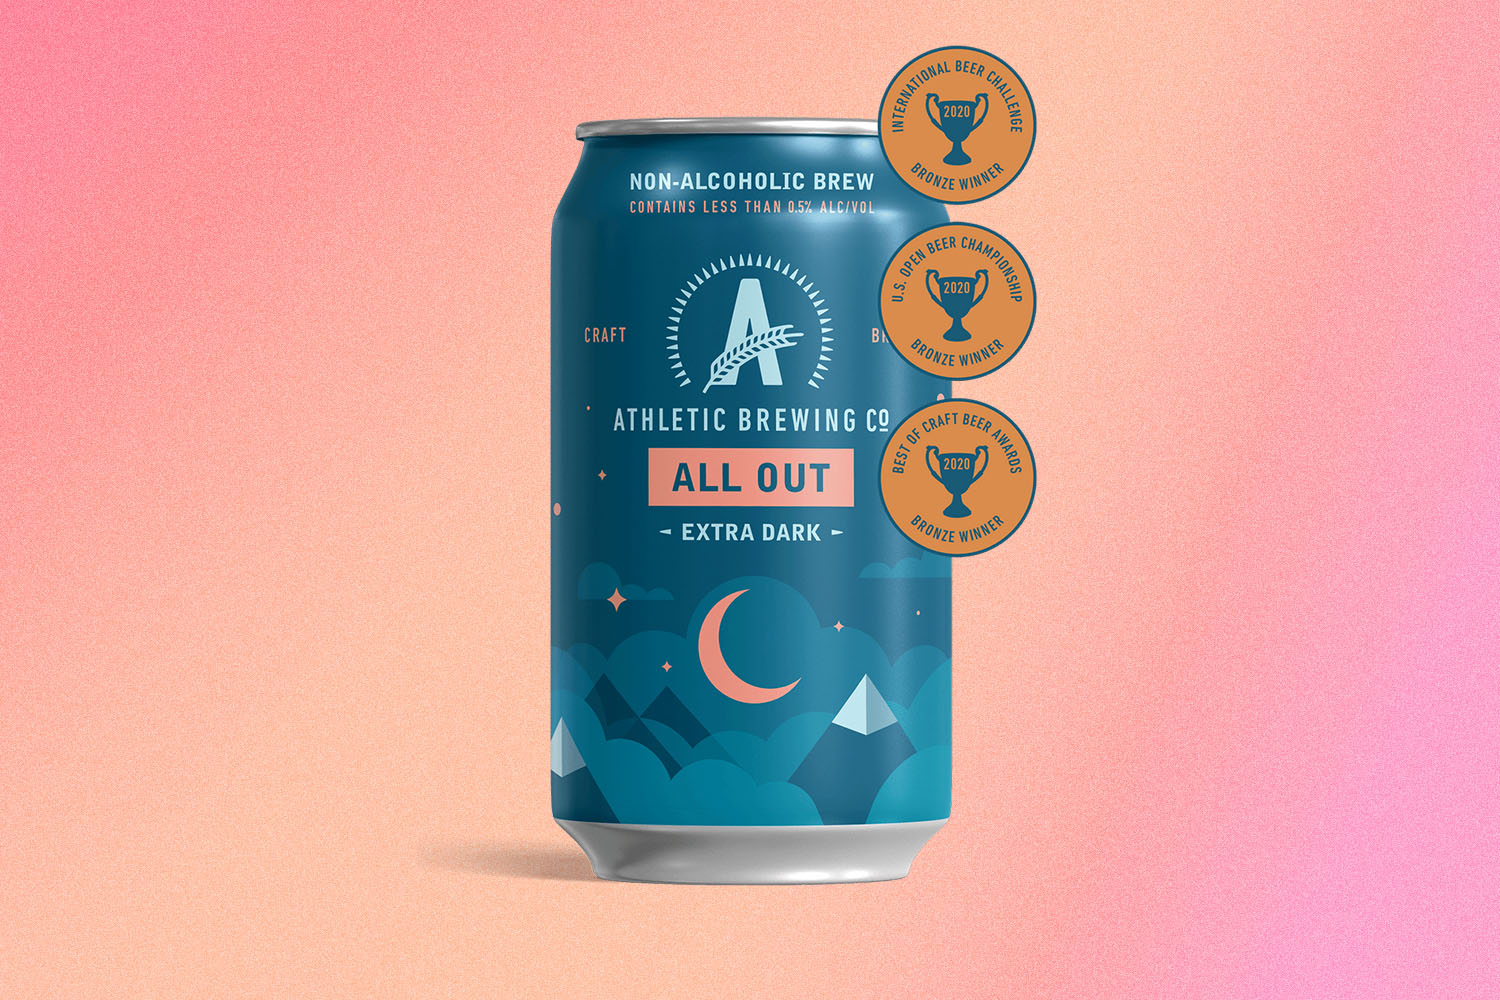 a non-alcoholic beer on a orange-pink background